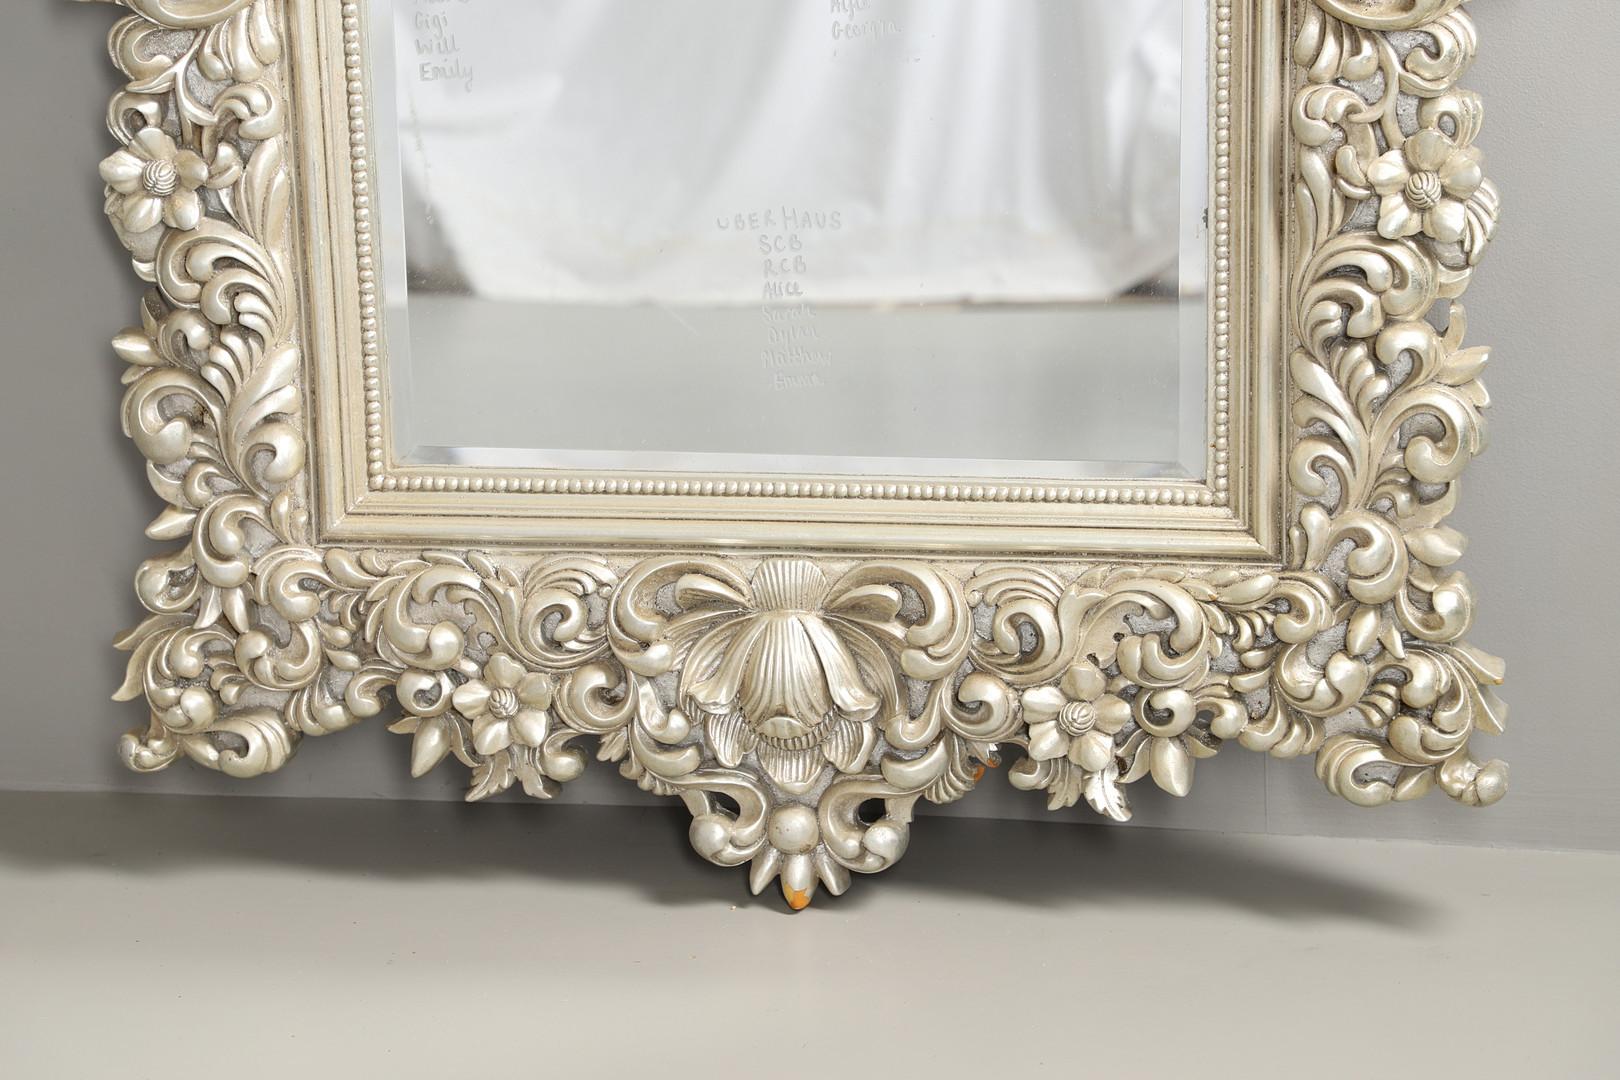 British Luxury Wall Mirror, Antique Silver Plated Rococo Floral Modern Console Mirror For Sale